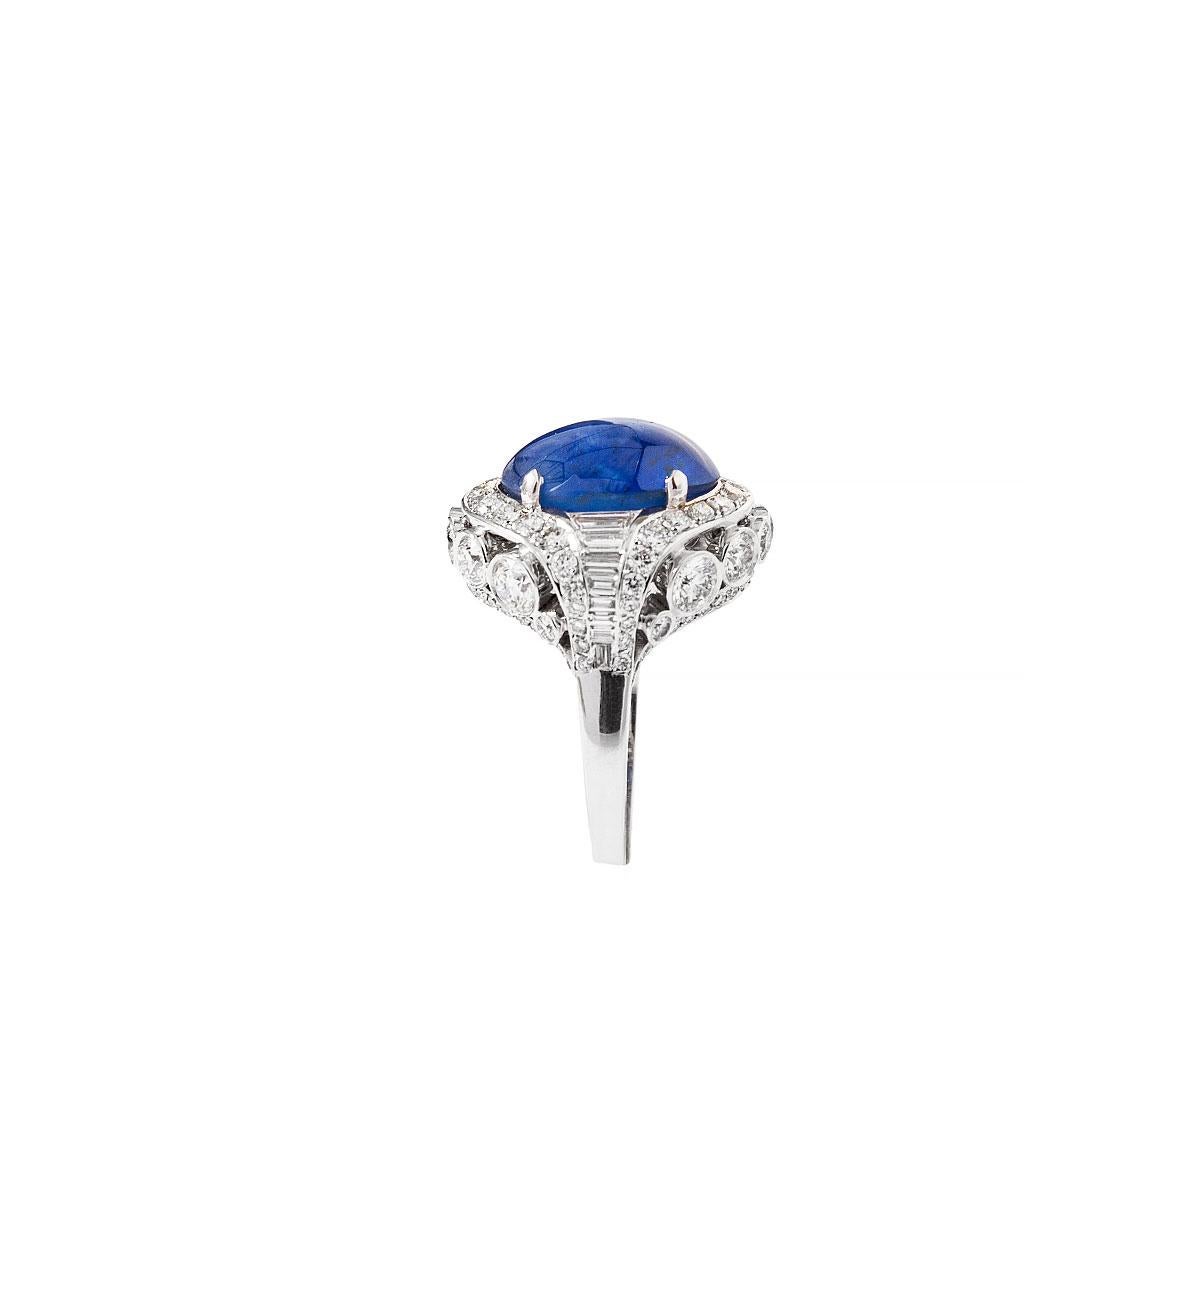 Modern 10.09 Ct's Unheat Ceylon Star Sapphire Cocktail Ring with Diamonds For Sale